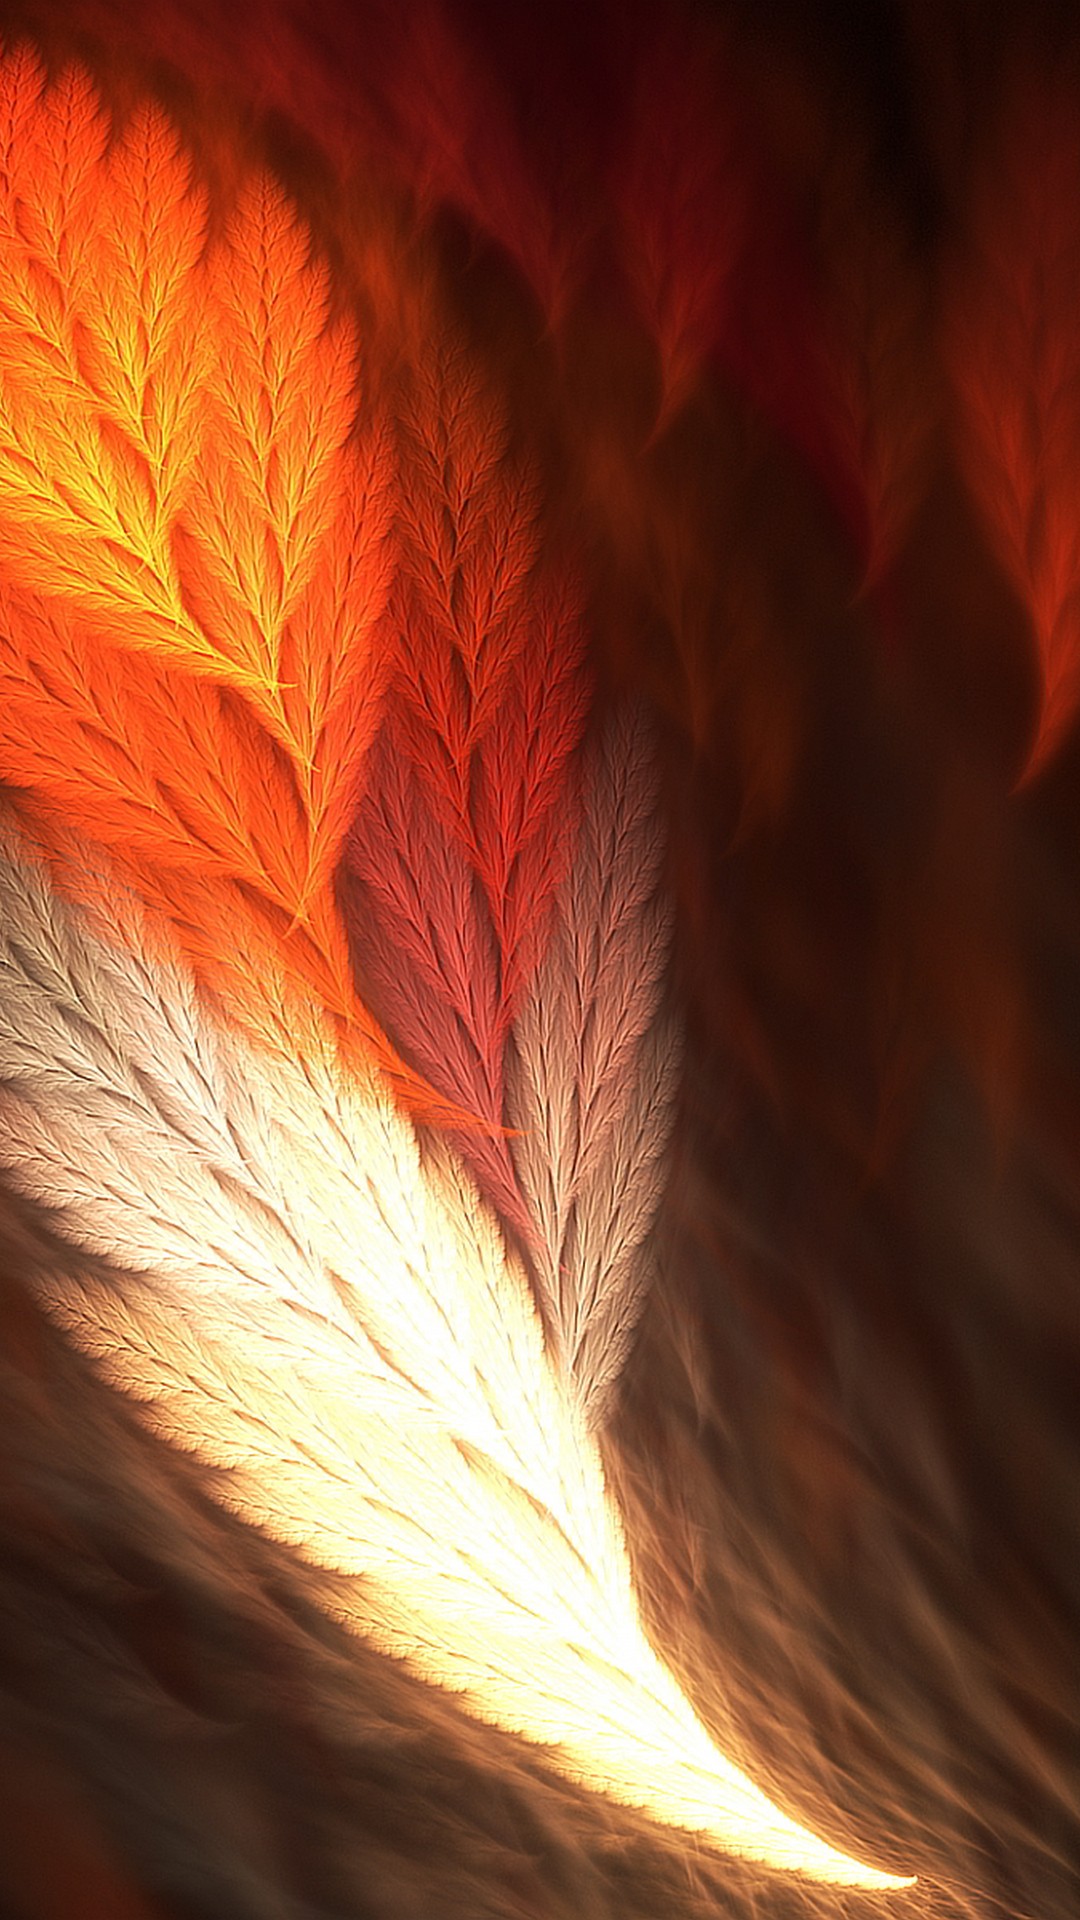 Phoenix Bird Images Backgrounds For Android with image resolution 1080x1920 pixel. You can make this wallpaper for your Android backgrounds, Tablet, Smartphones Screensavers and Mobile Phone Lock Screen